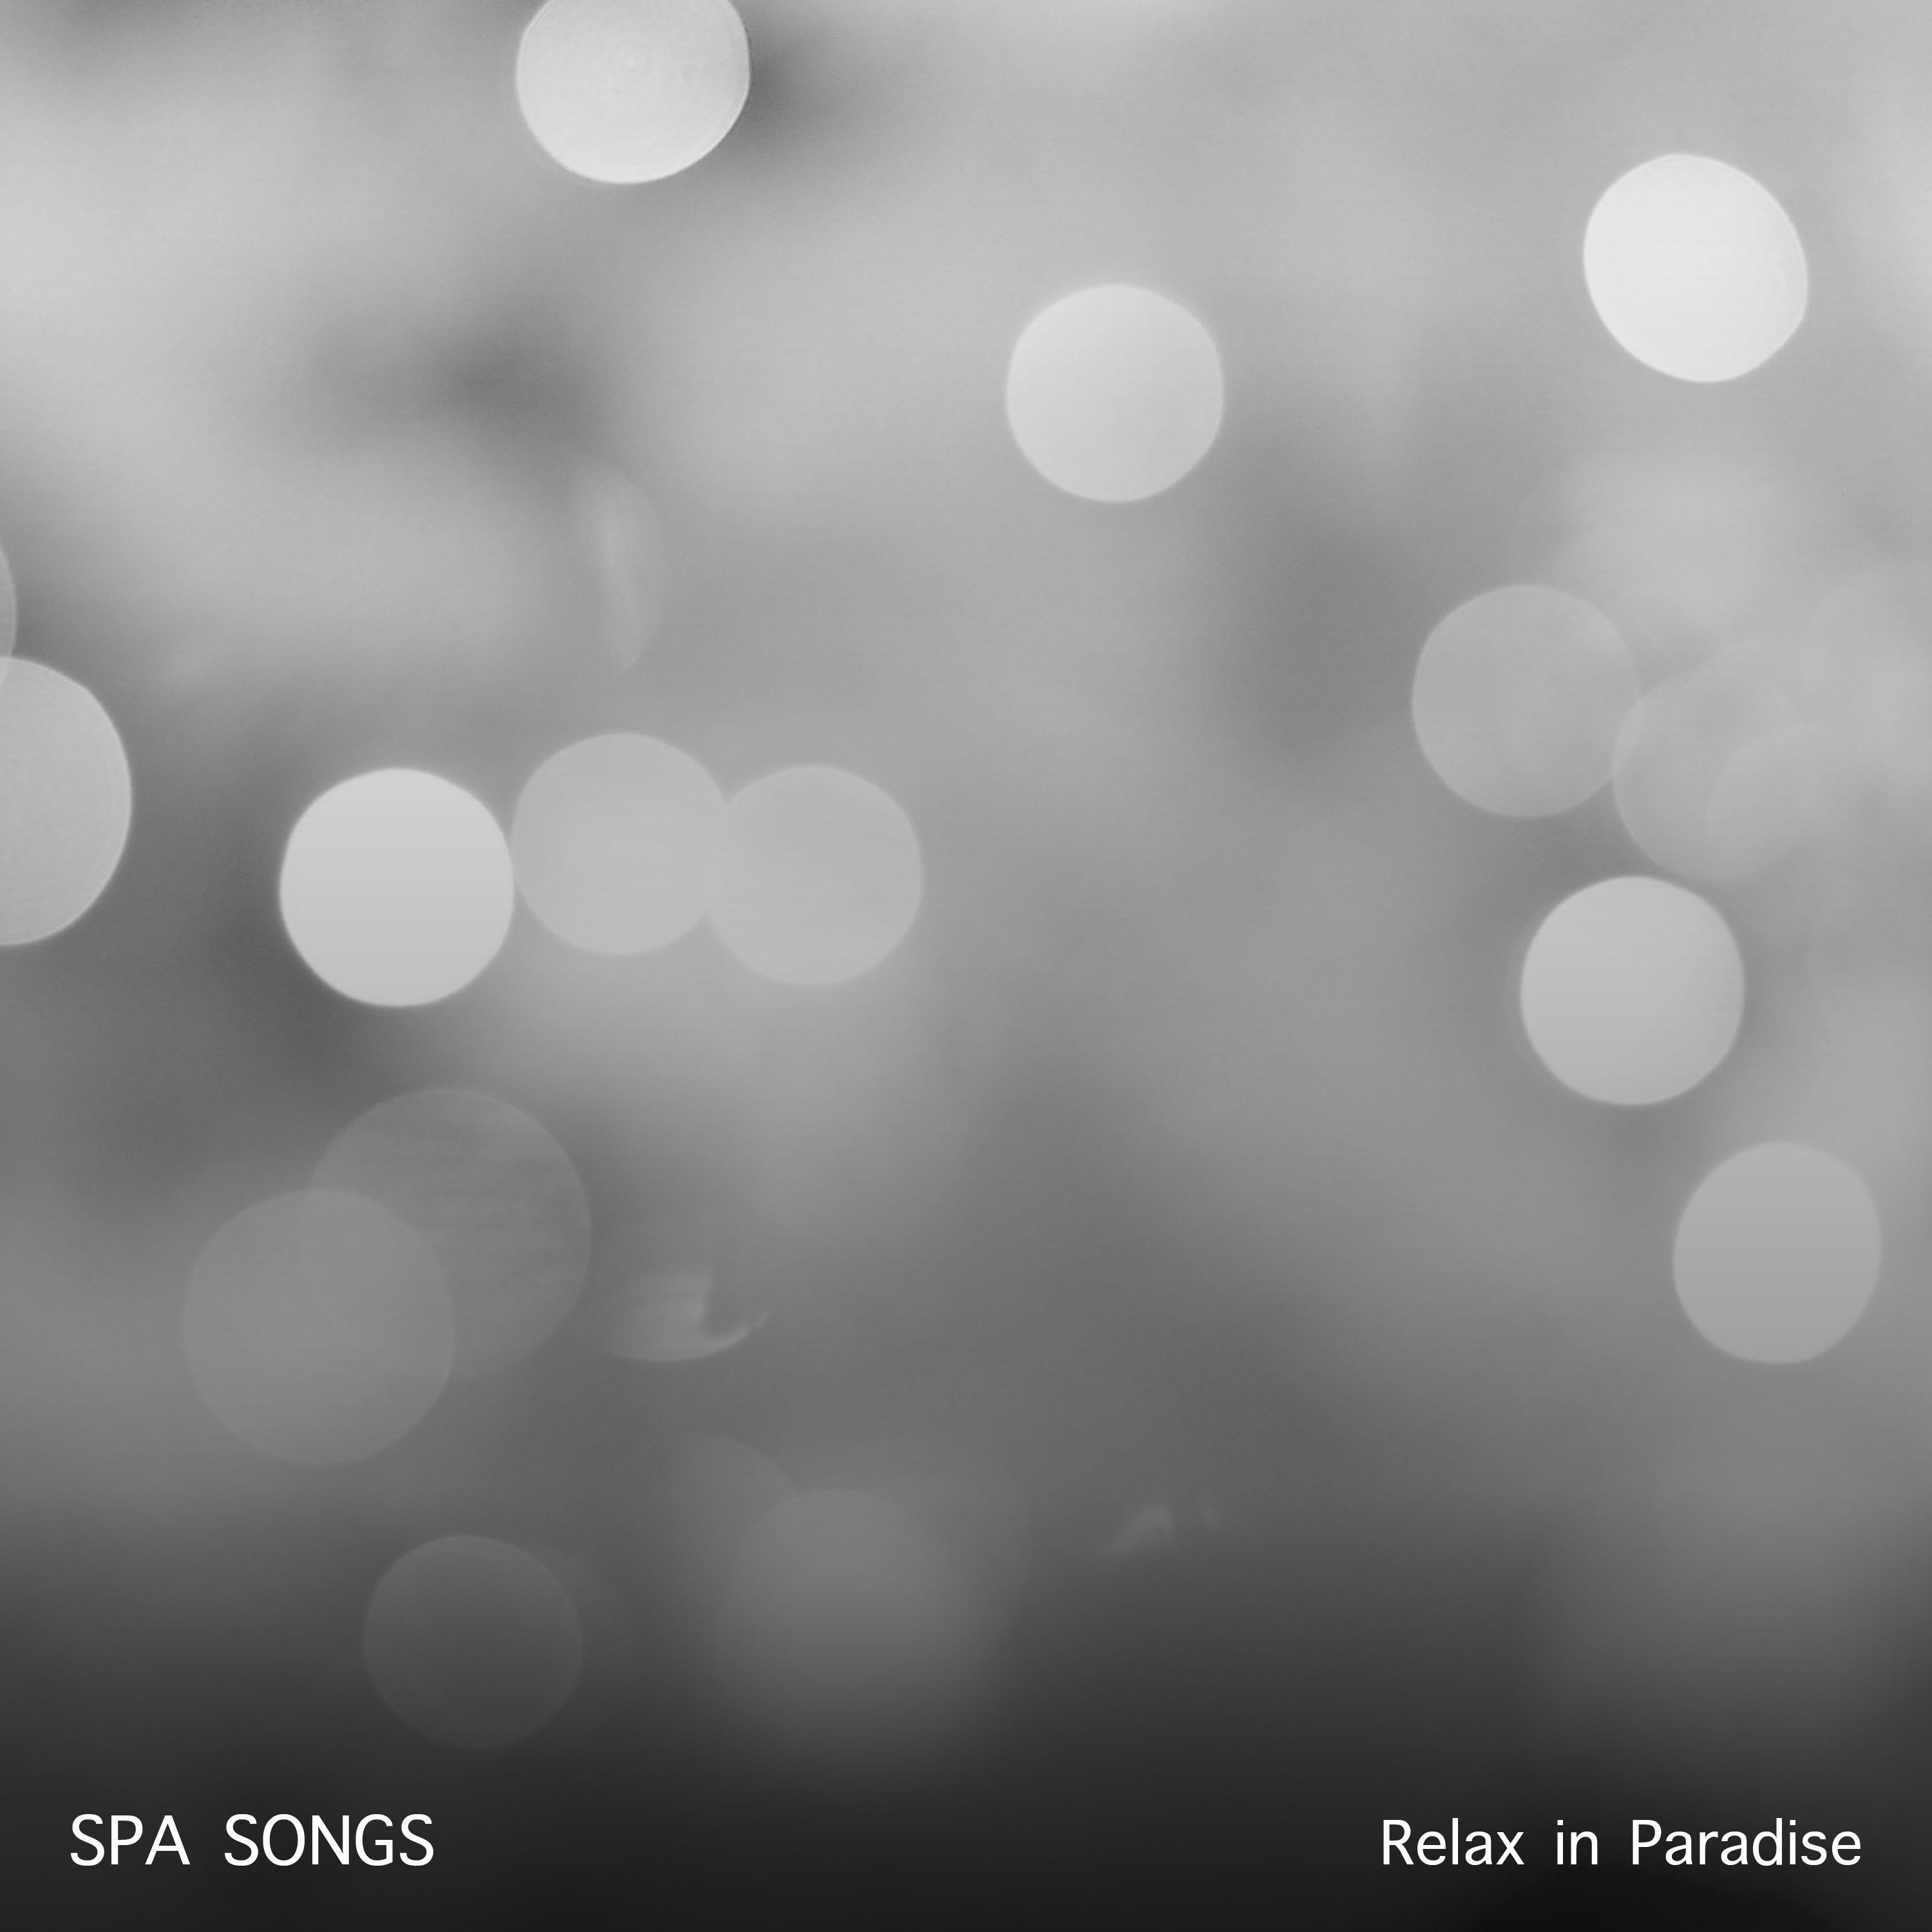 14 Spa Songs: Relax in Paradise